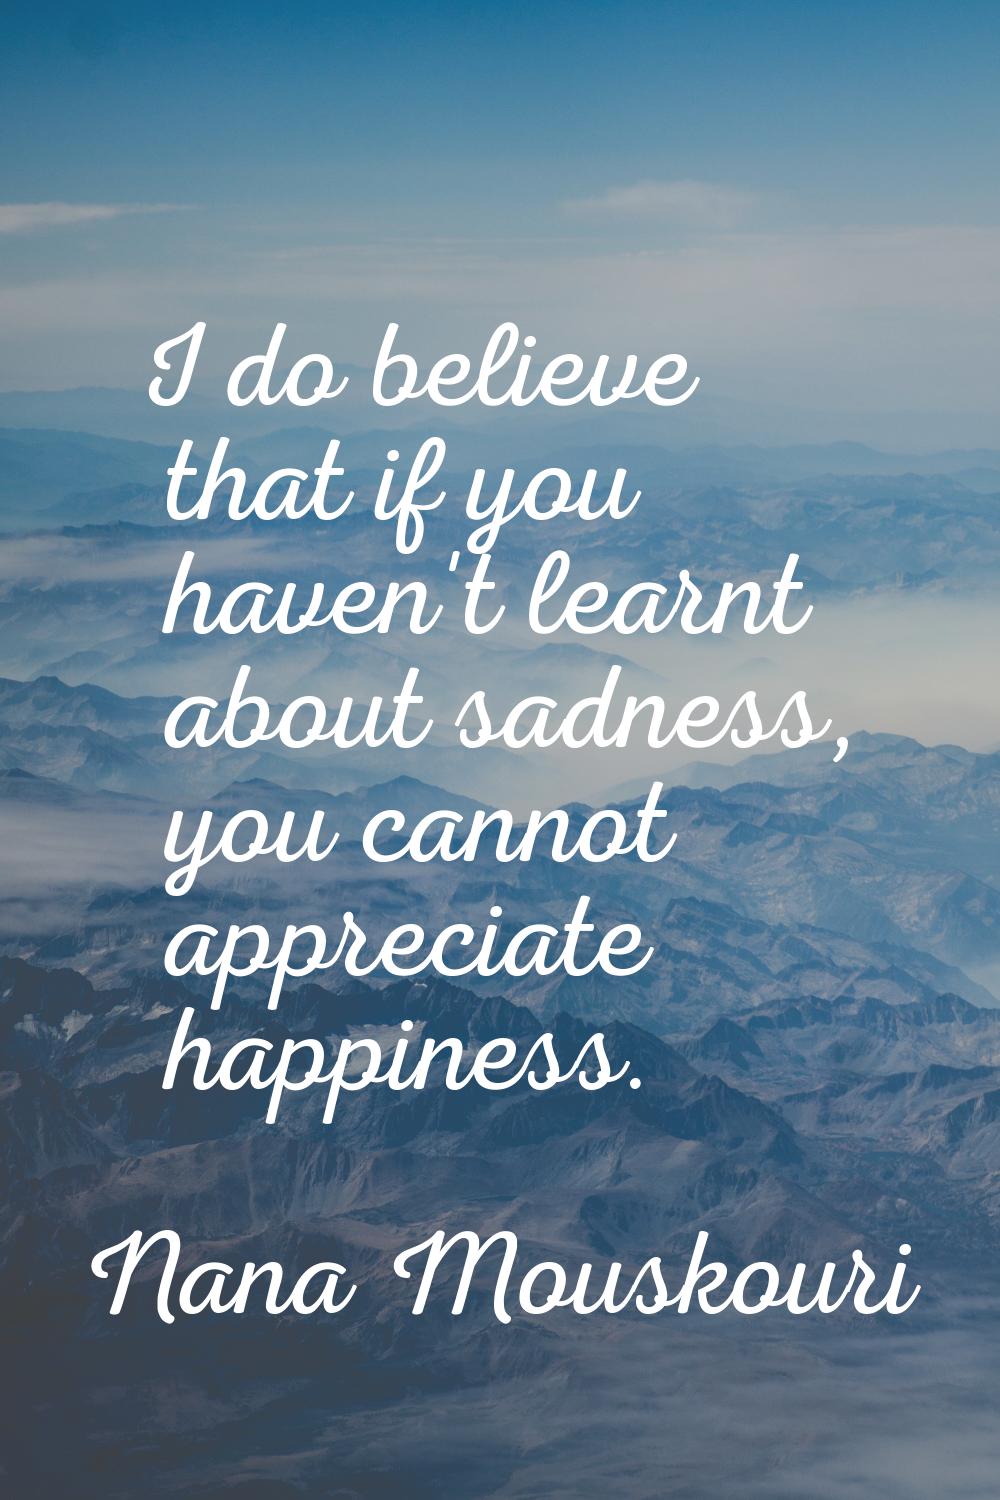 I do believe that if you haven't learnt about sadness, you cannot appreciate happiness.